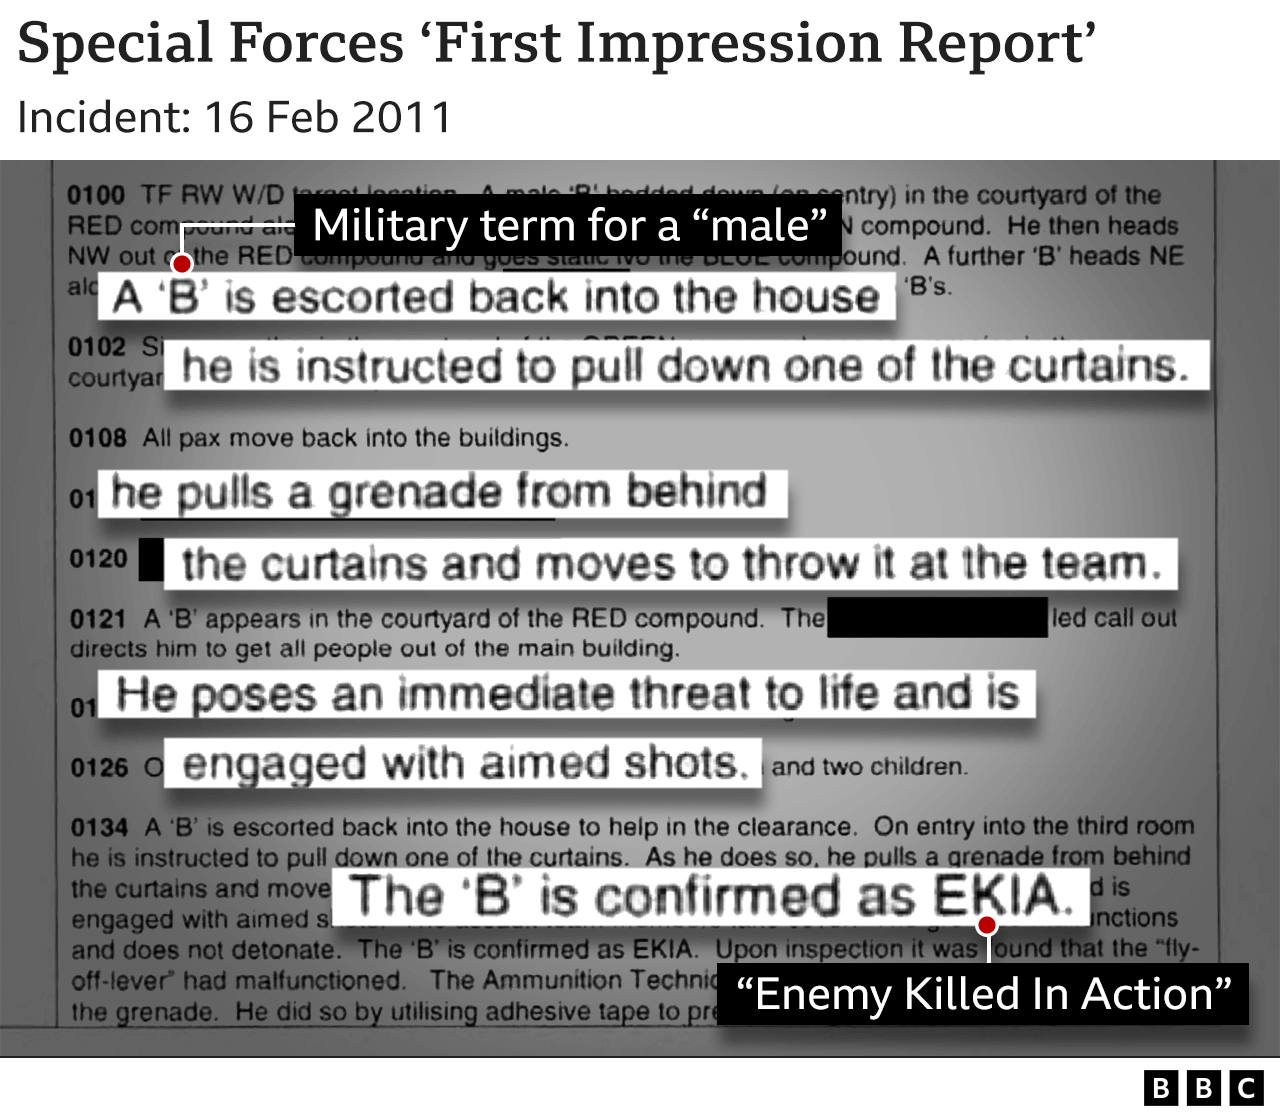 Special Forces 'First Impression Report' of incident, 16 Feb 2011